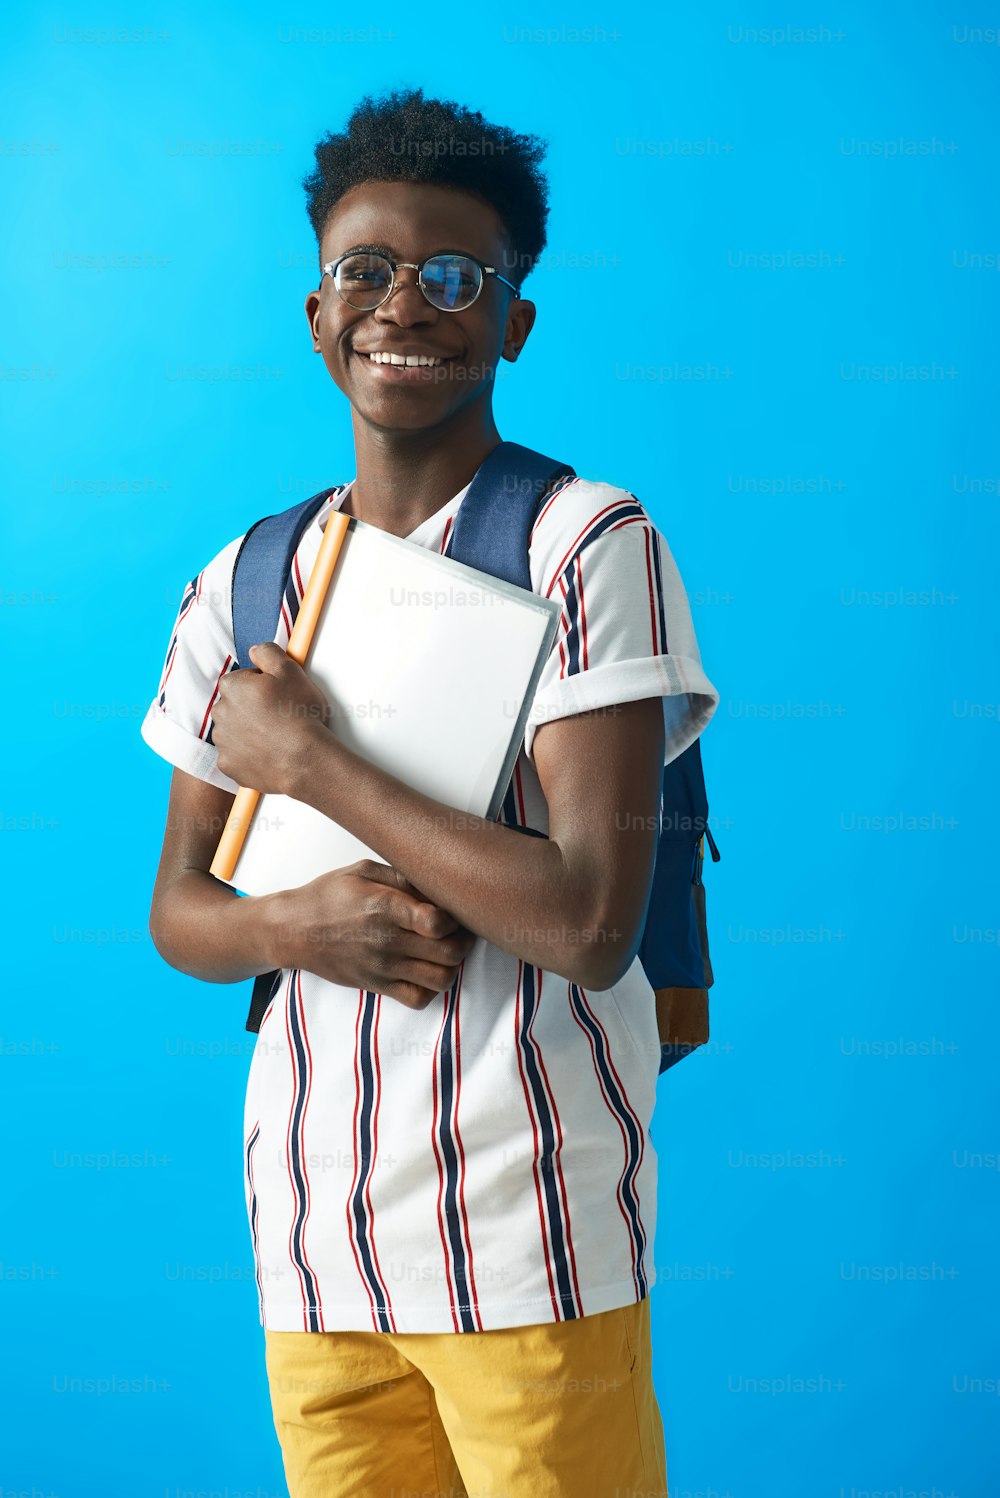 Waist up portrait of Aframerican young guy wearing striped t-shirt and holding files. Isolated on blue background